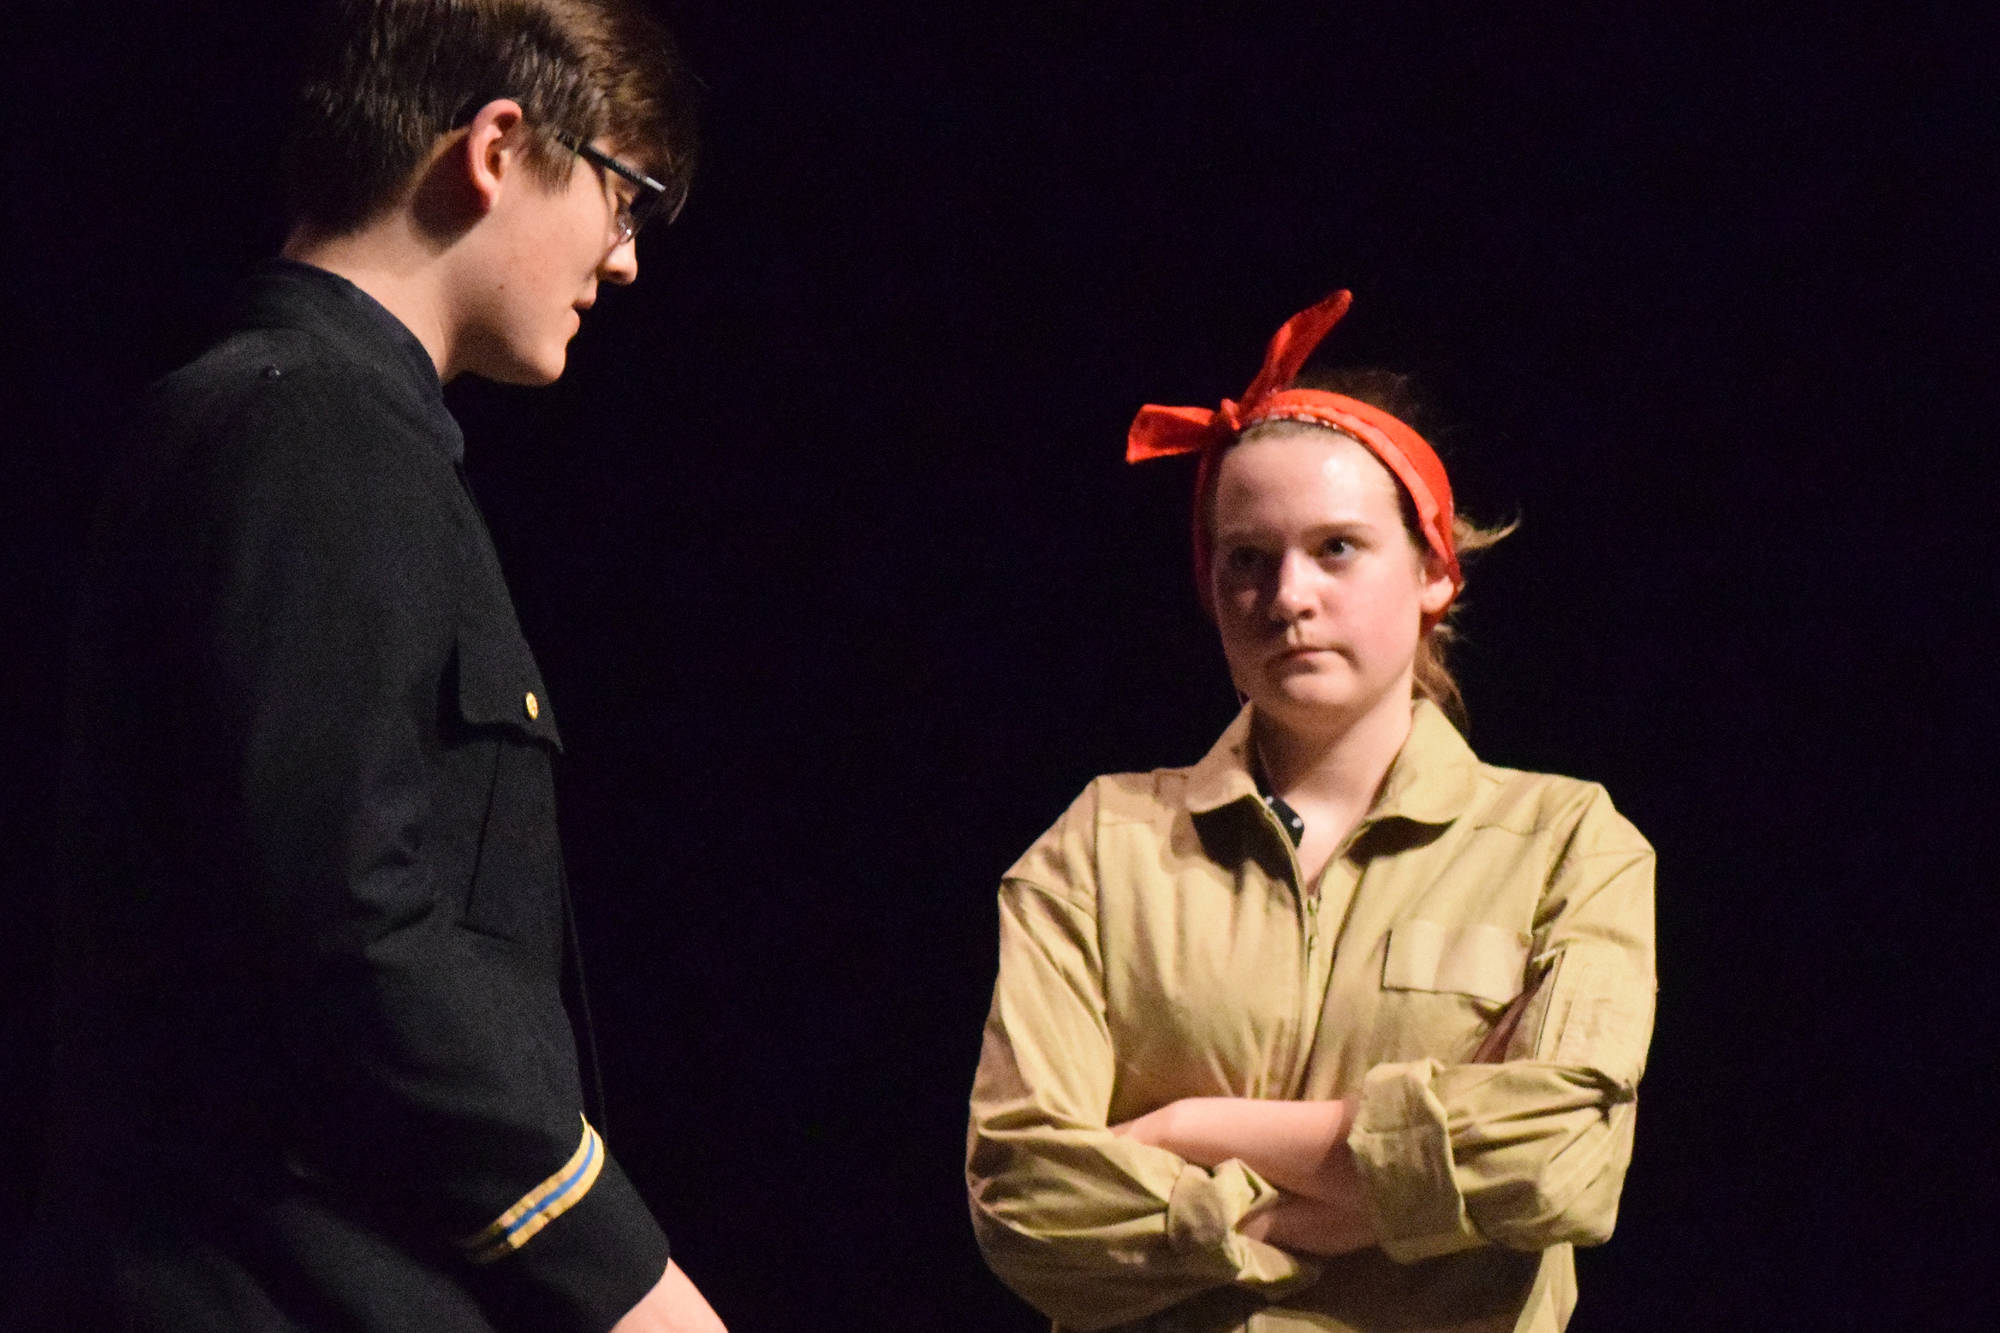 Katie Schwartz (right) trades lines with Jaron Swanson during rehearsal for “Rosie” Tuesday, April 16, 2019, at Soldotna High School in Soldotna, Alaska. (Photo by Joey Klecka/Peninsula Clarion)